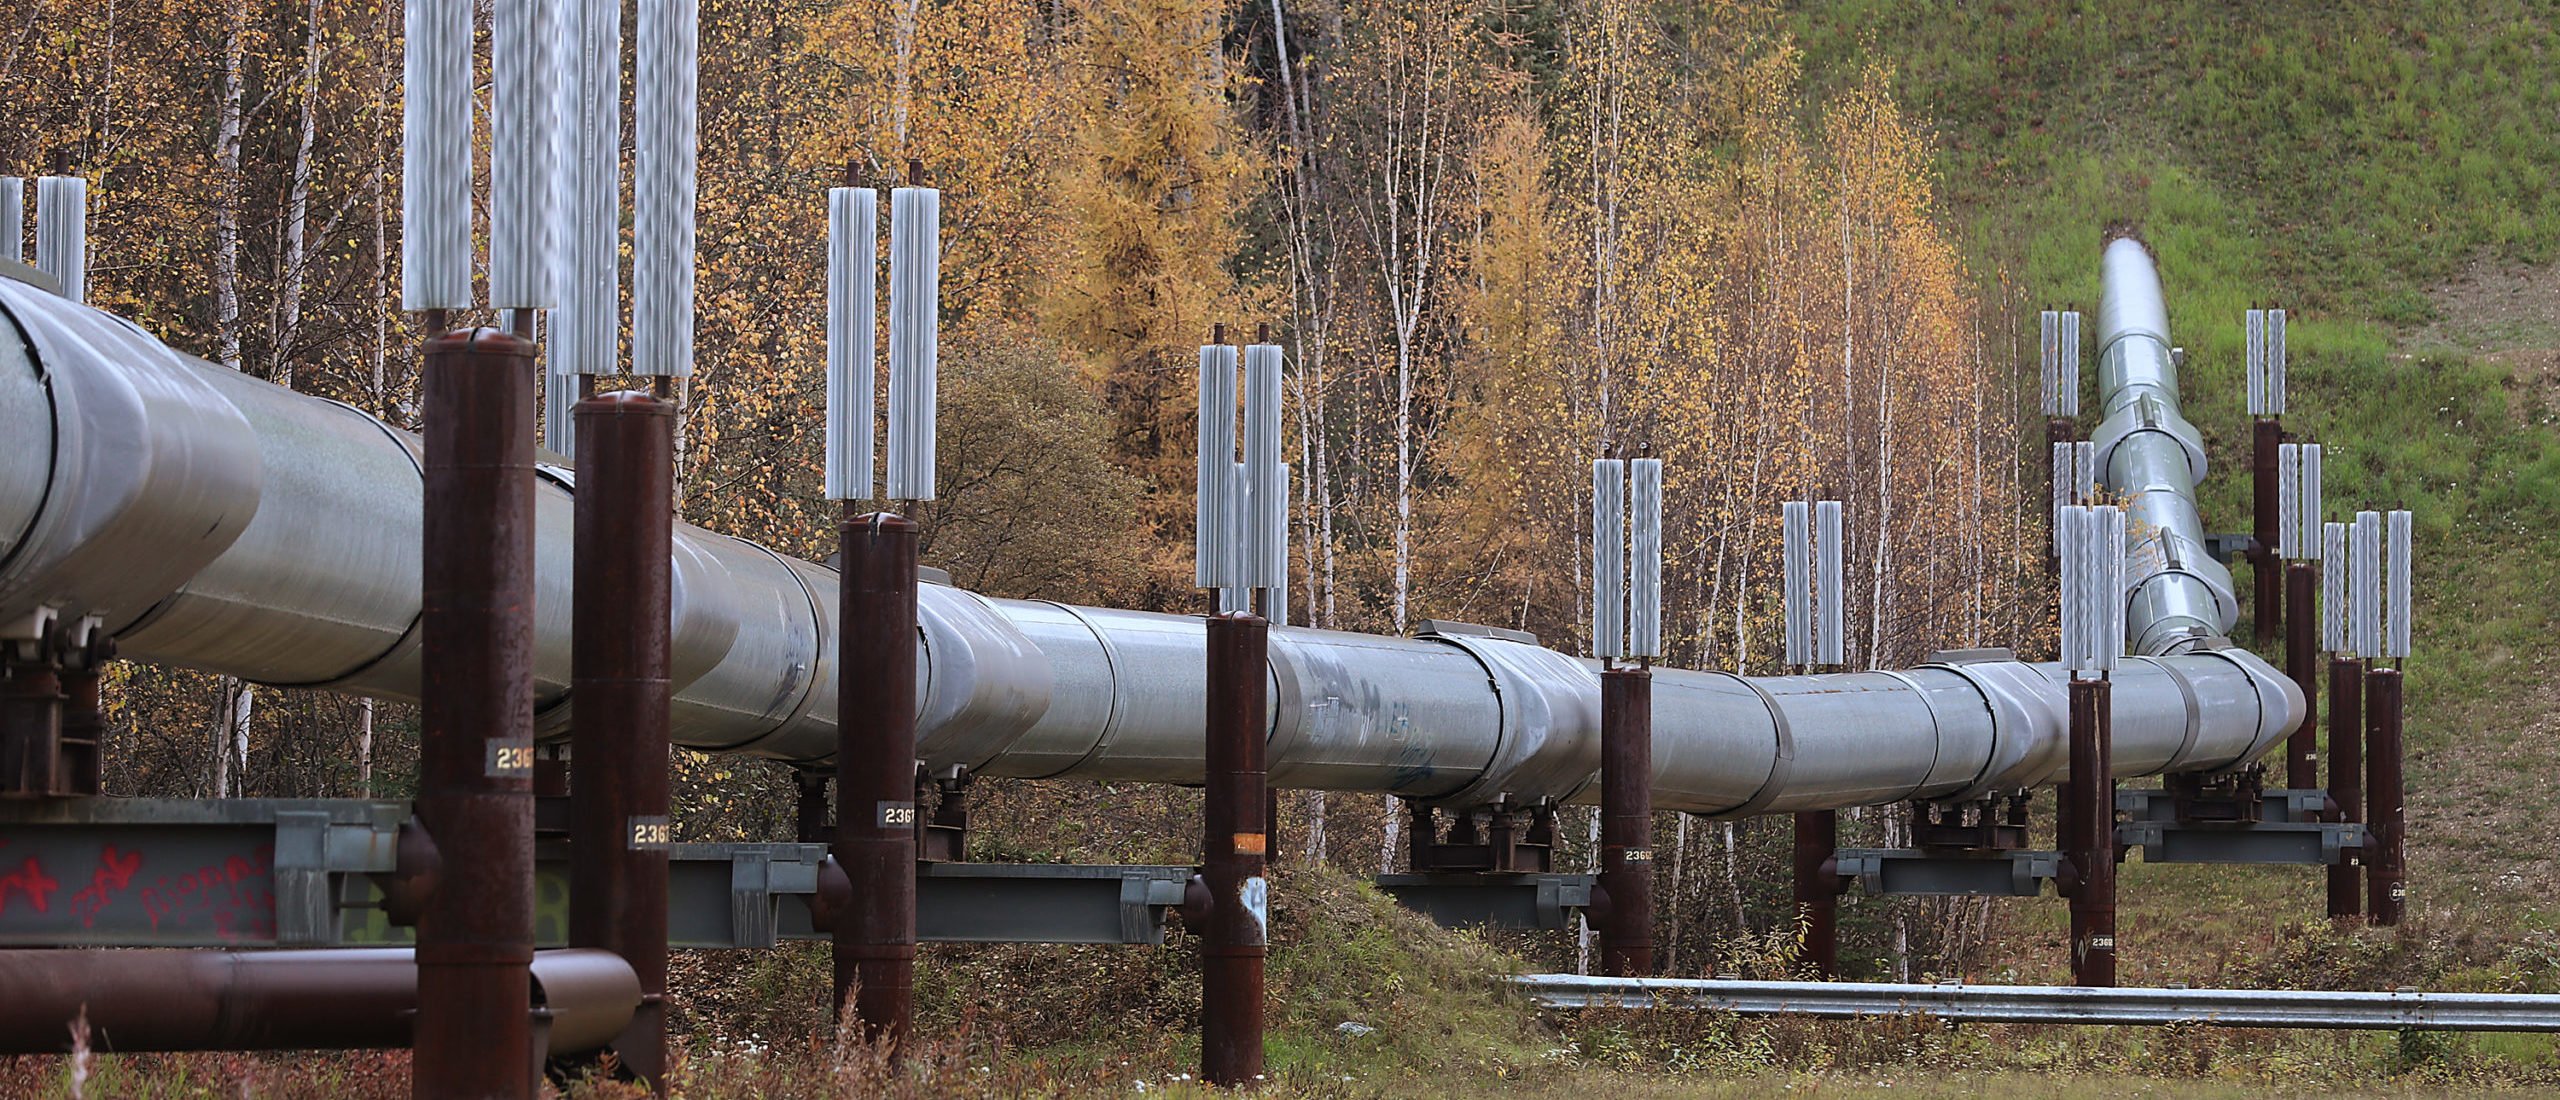 FAIRBANKS, ALASKA - SEPTEMBER 17: A part of the Trans Alaska Pipeline System is seen on September 17, 2019 in Fairbanks, Alaska. The 800-mile-long pipeline carries oil from Prudhoe Bay to Valdez. After an attack on a petroleum processing facility in Saudi Arabia, U.S. President Donald Trump said that the United States is well positioned to handle the loss of that oil output because of both the U.S. strategic petroleum reserve and the amount of energy output by the U.S. (Photo by Joe Raedle/Getty Images)